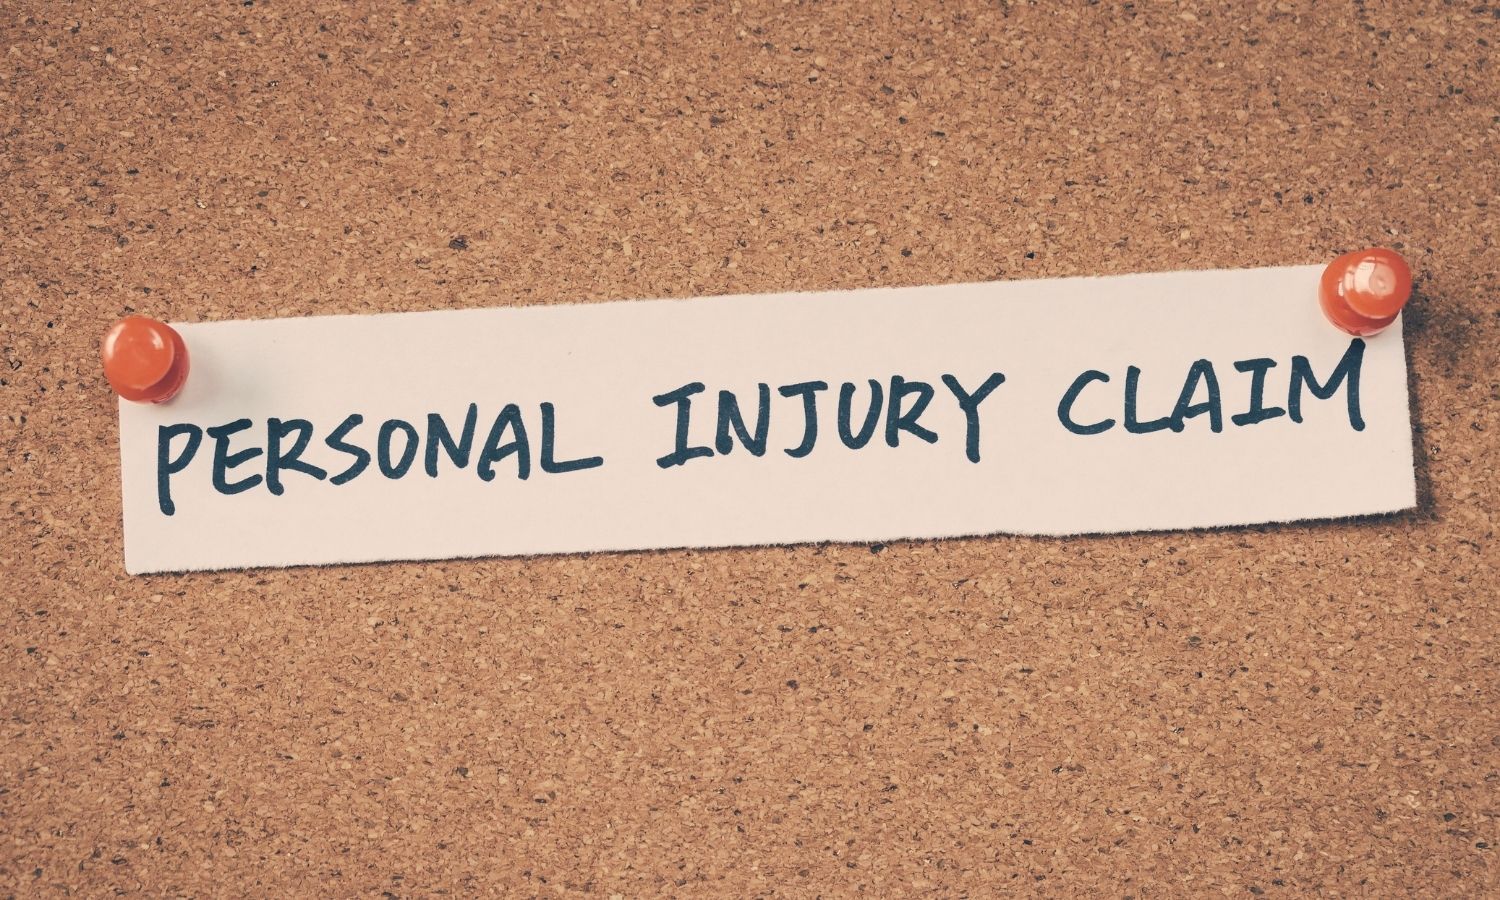 Valuing A Claim For Personal Injuries: It’s Not An Exact Science